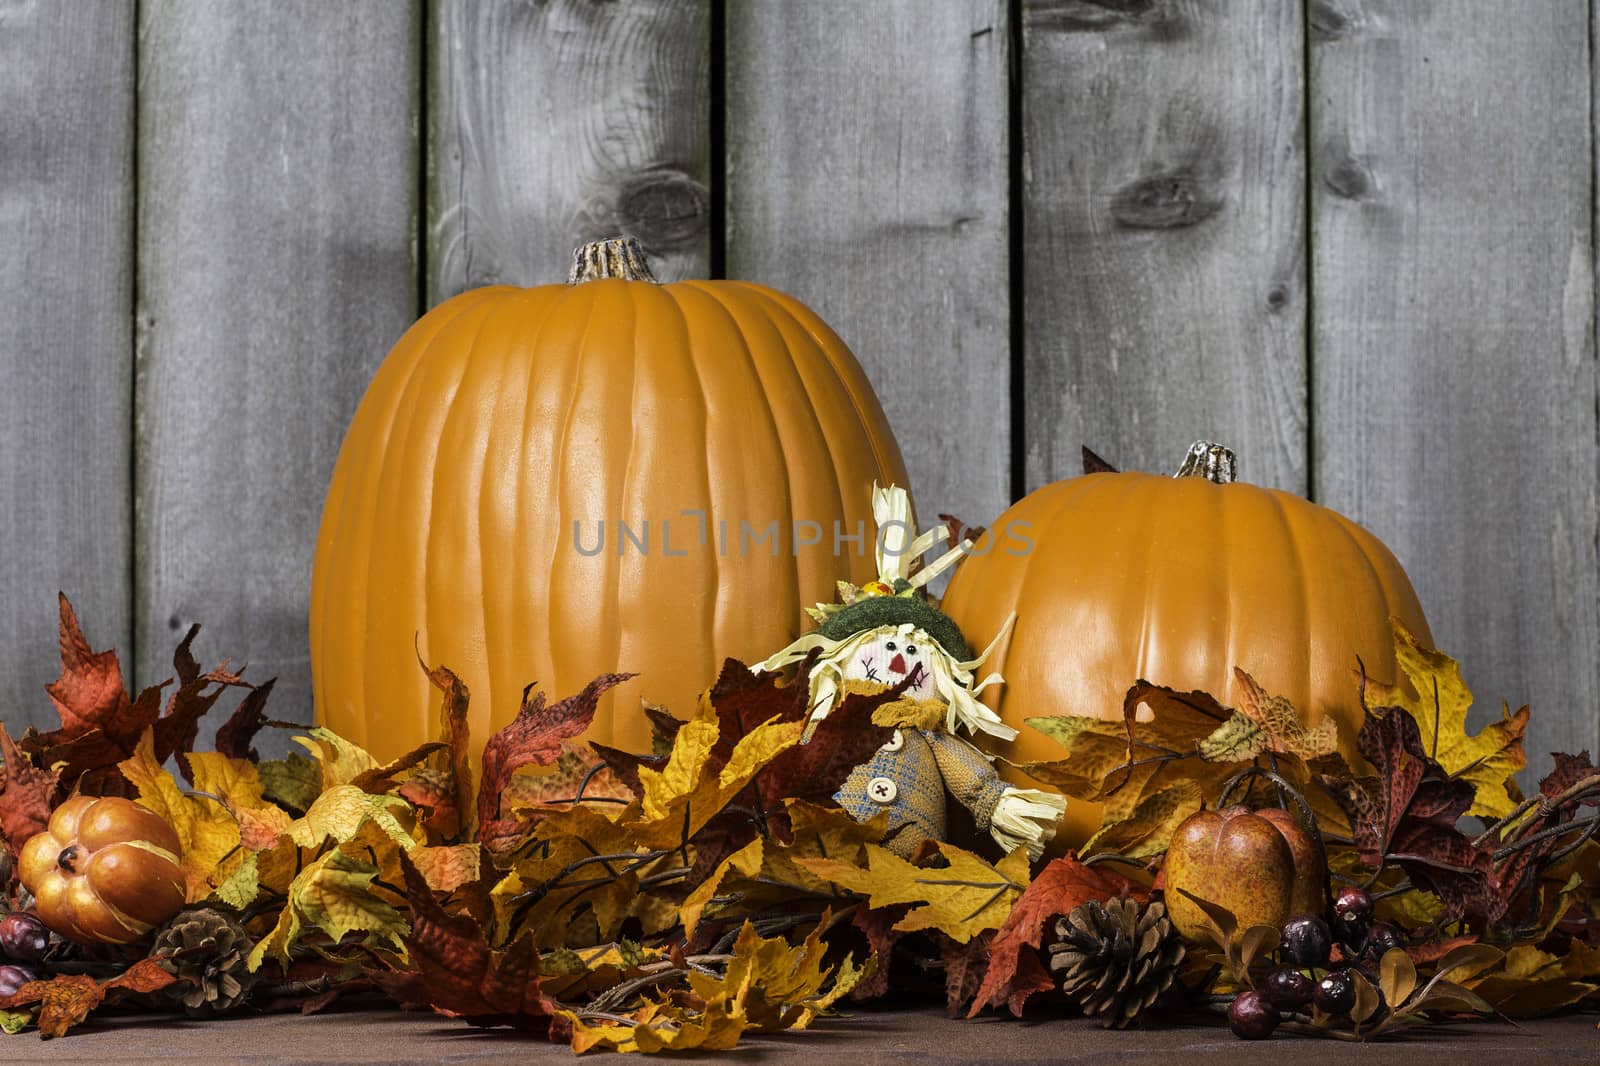 Pumpkin scene surrounded by fall colored leaves.